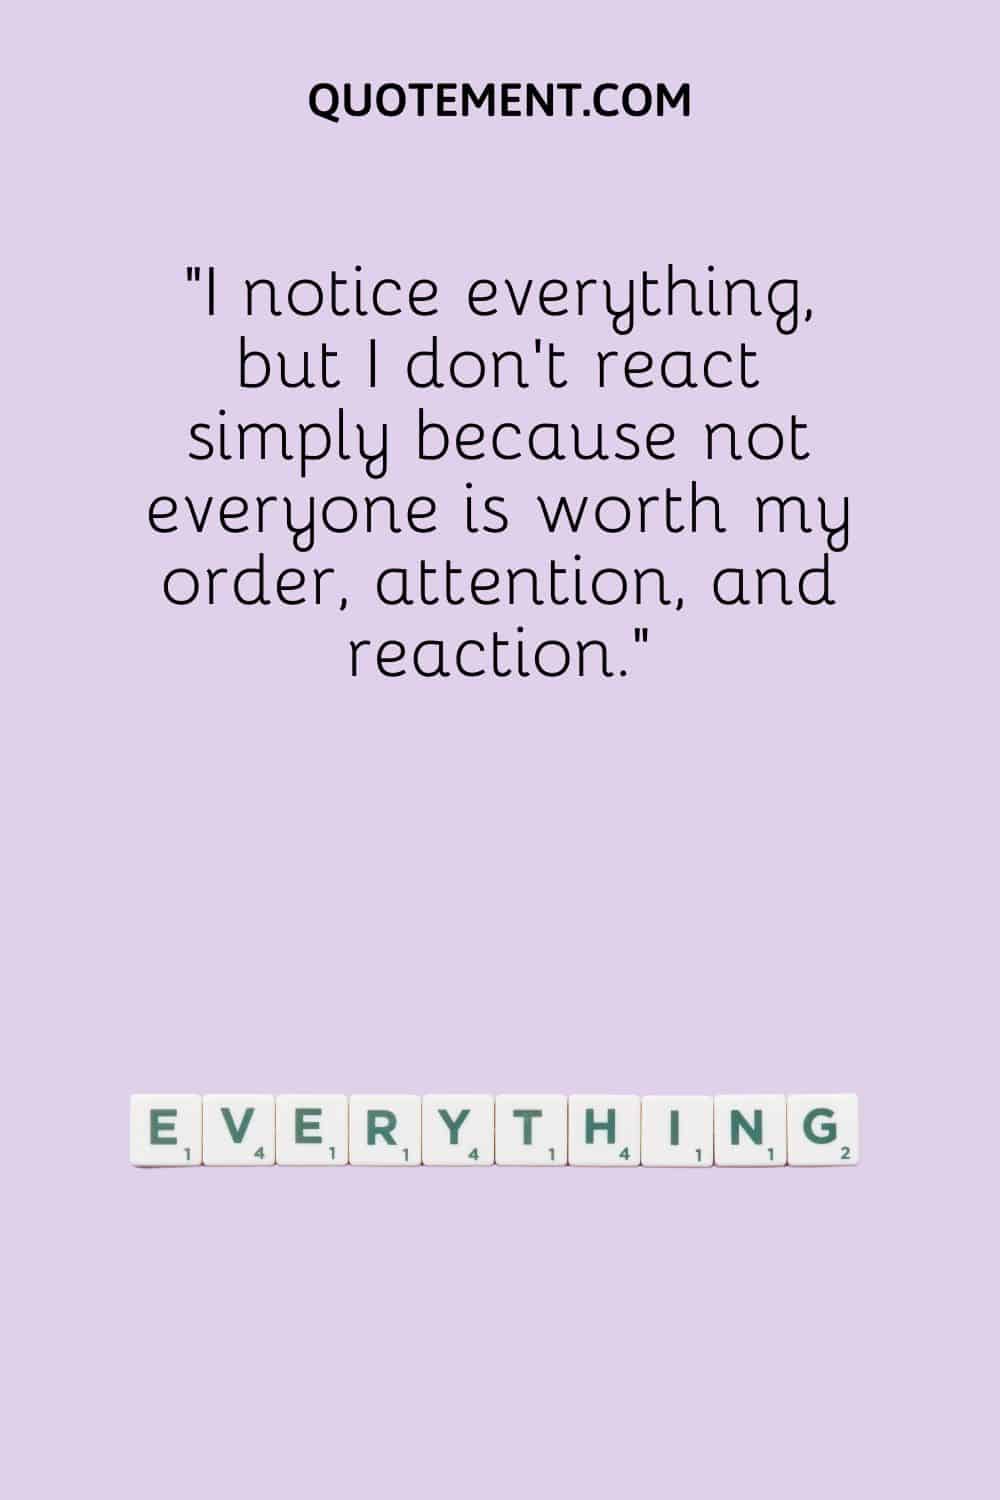 I notice everything, but I don’t react simply because not everyone is worth my order, attention, and reaction